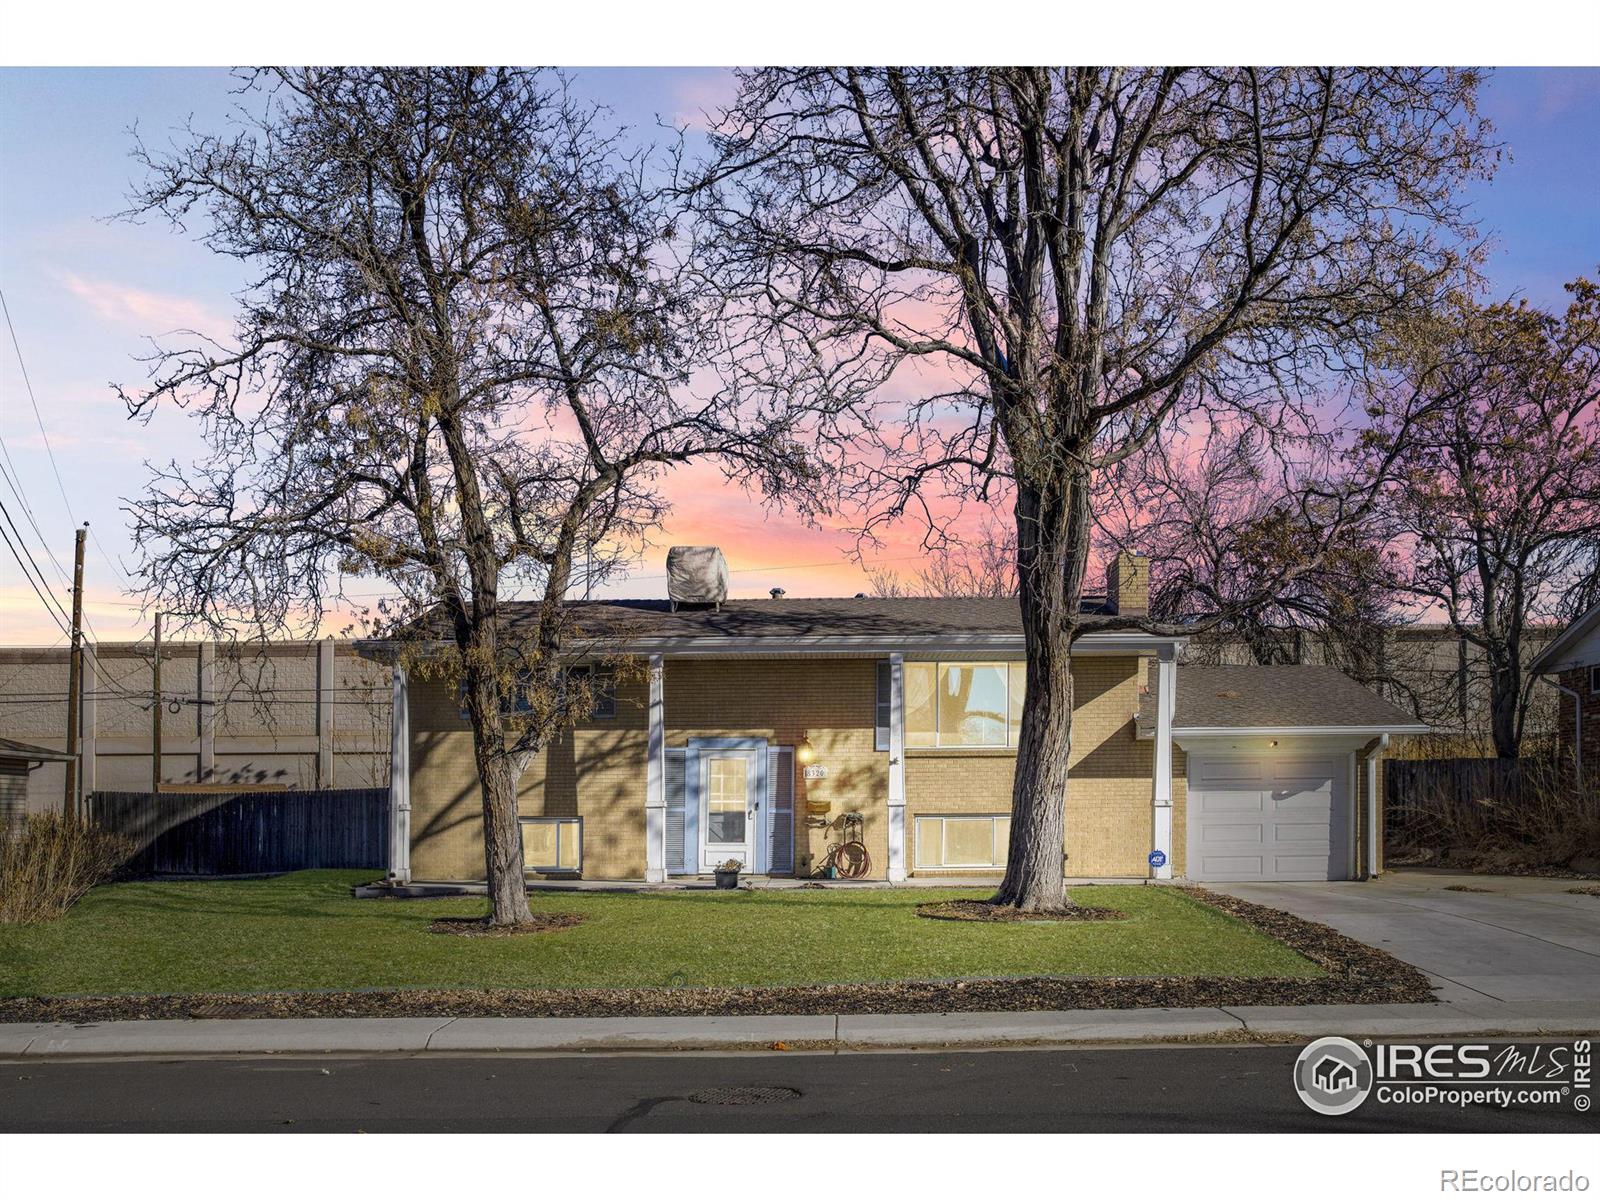 Report Image for 8320  Turnpike Drive,Westminster, Colorado